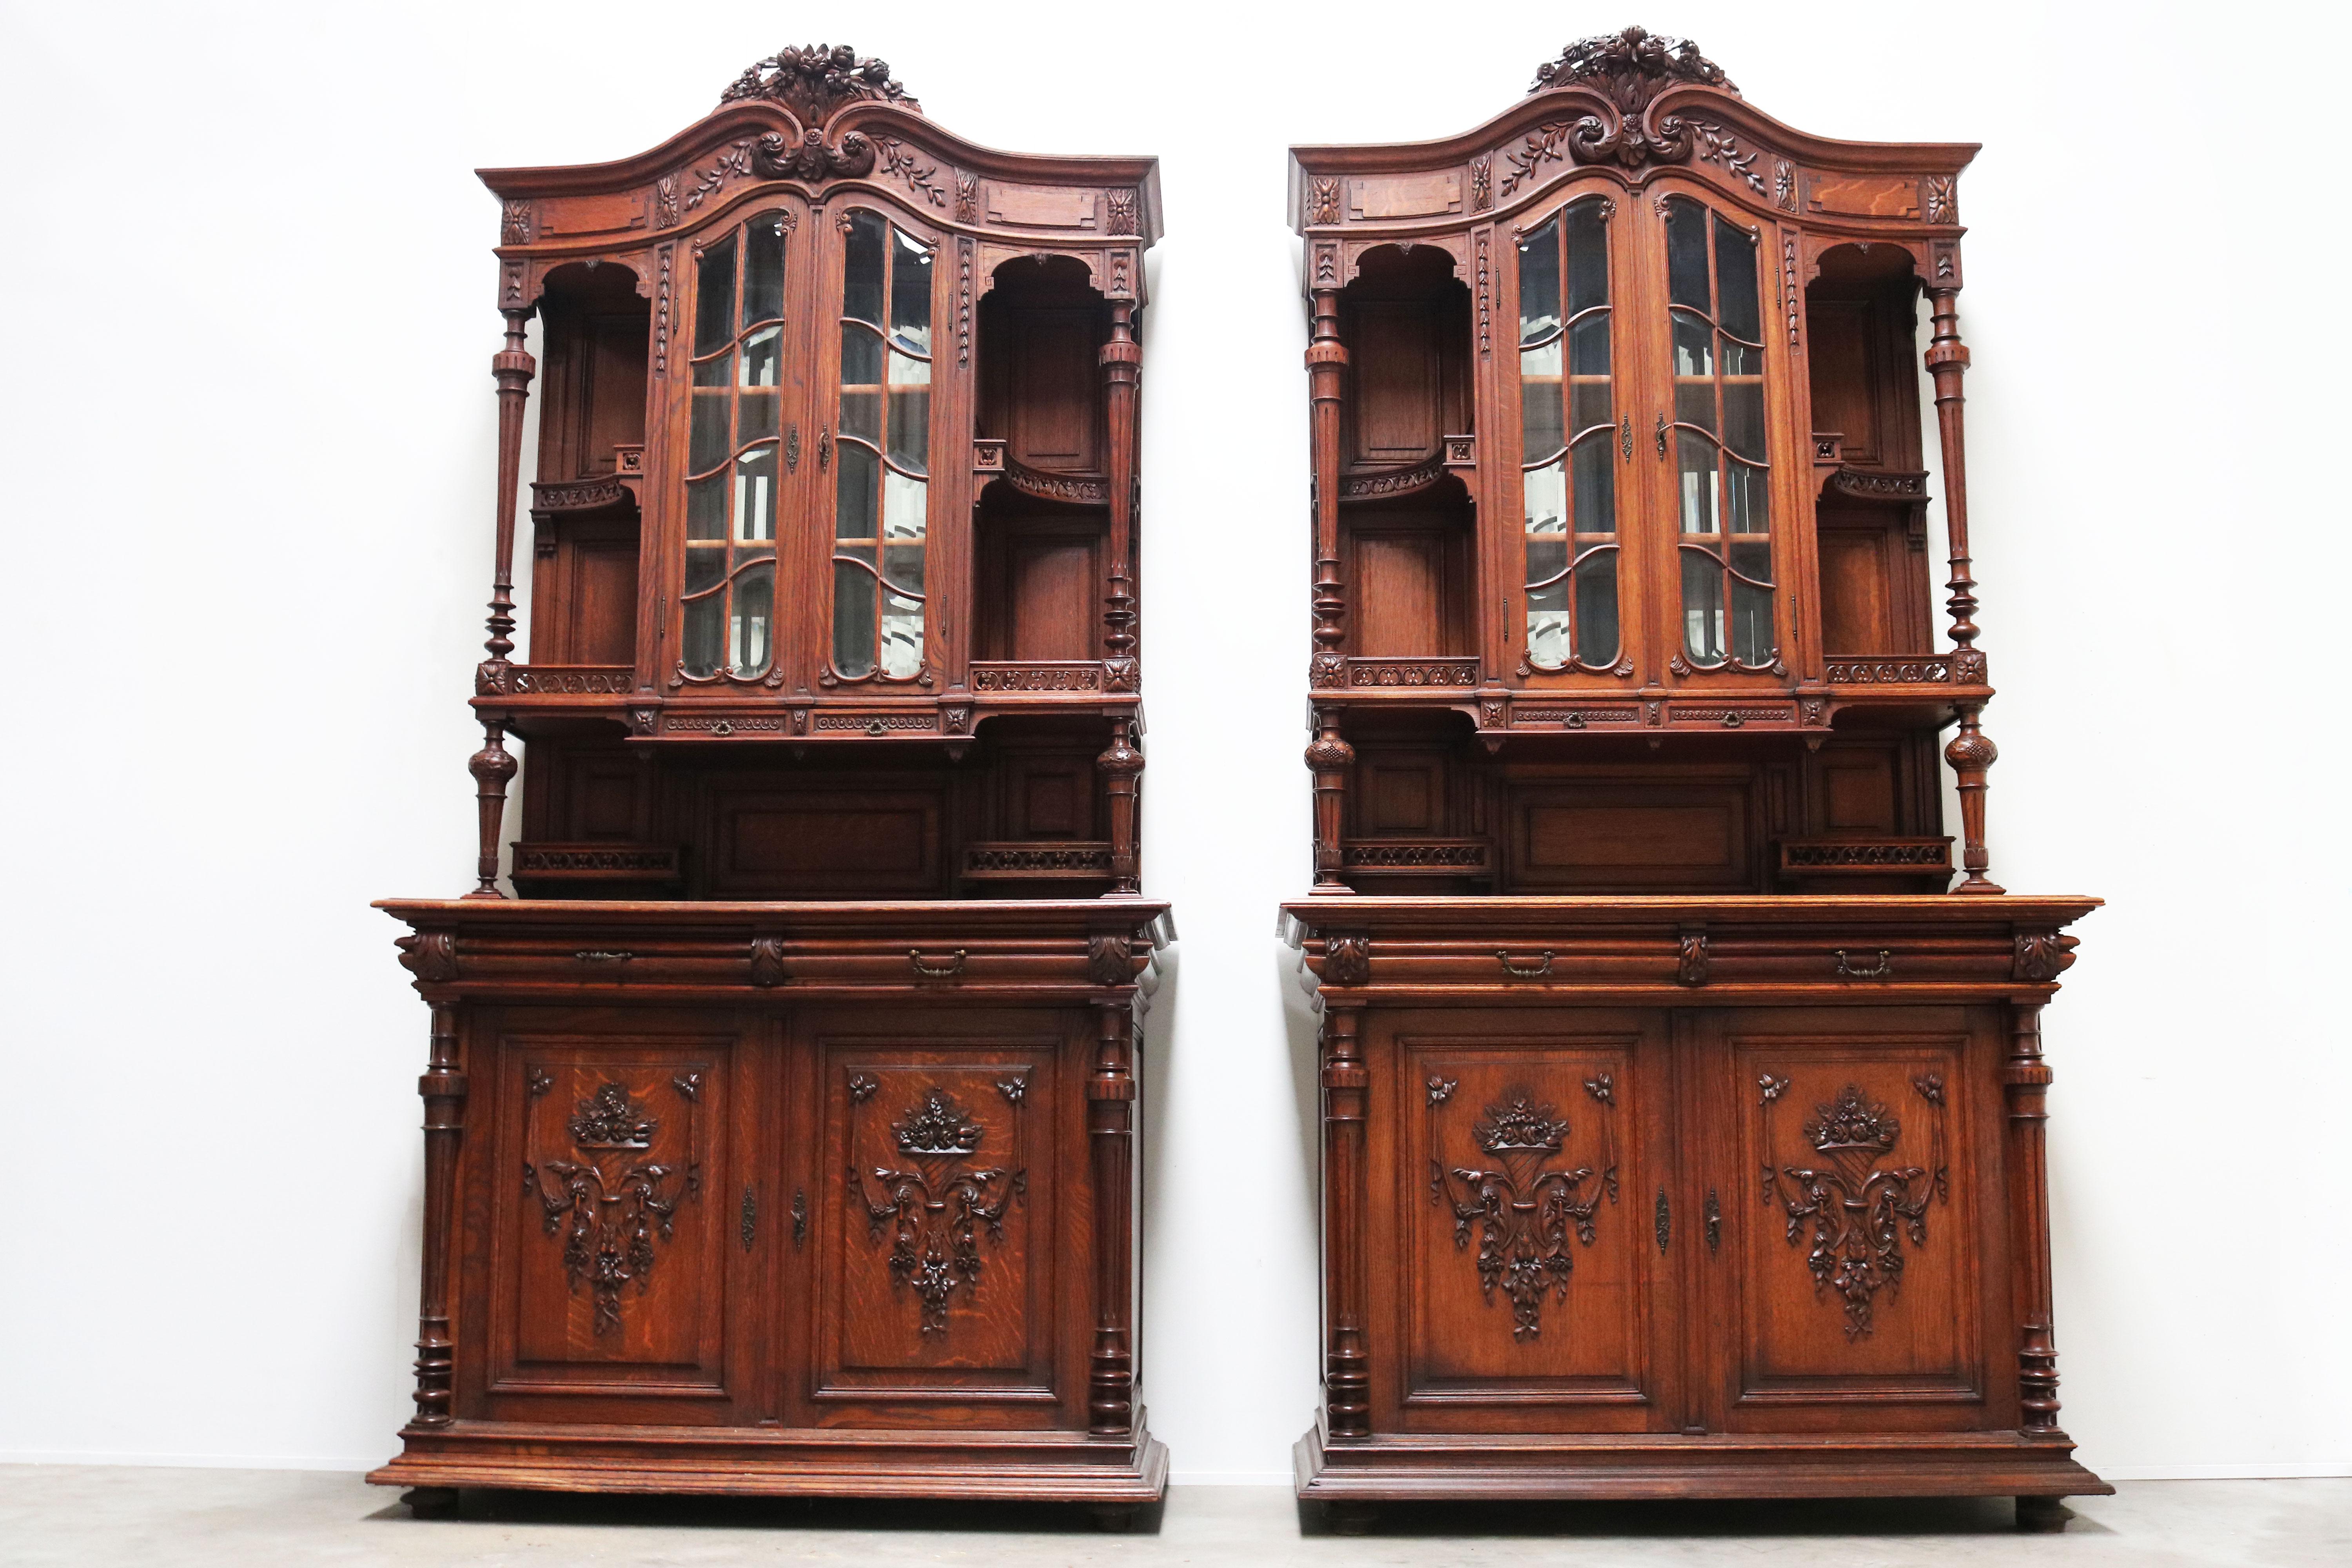 Simply stunning! This pair of French renaissance revival buffet cabinets from the 19th century. 
Both cabinets are made out of solid oak with 16 beveled glass windows & 1 beveled mirror on the backside. 
Amazing quality with many detailed carvings